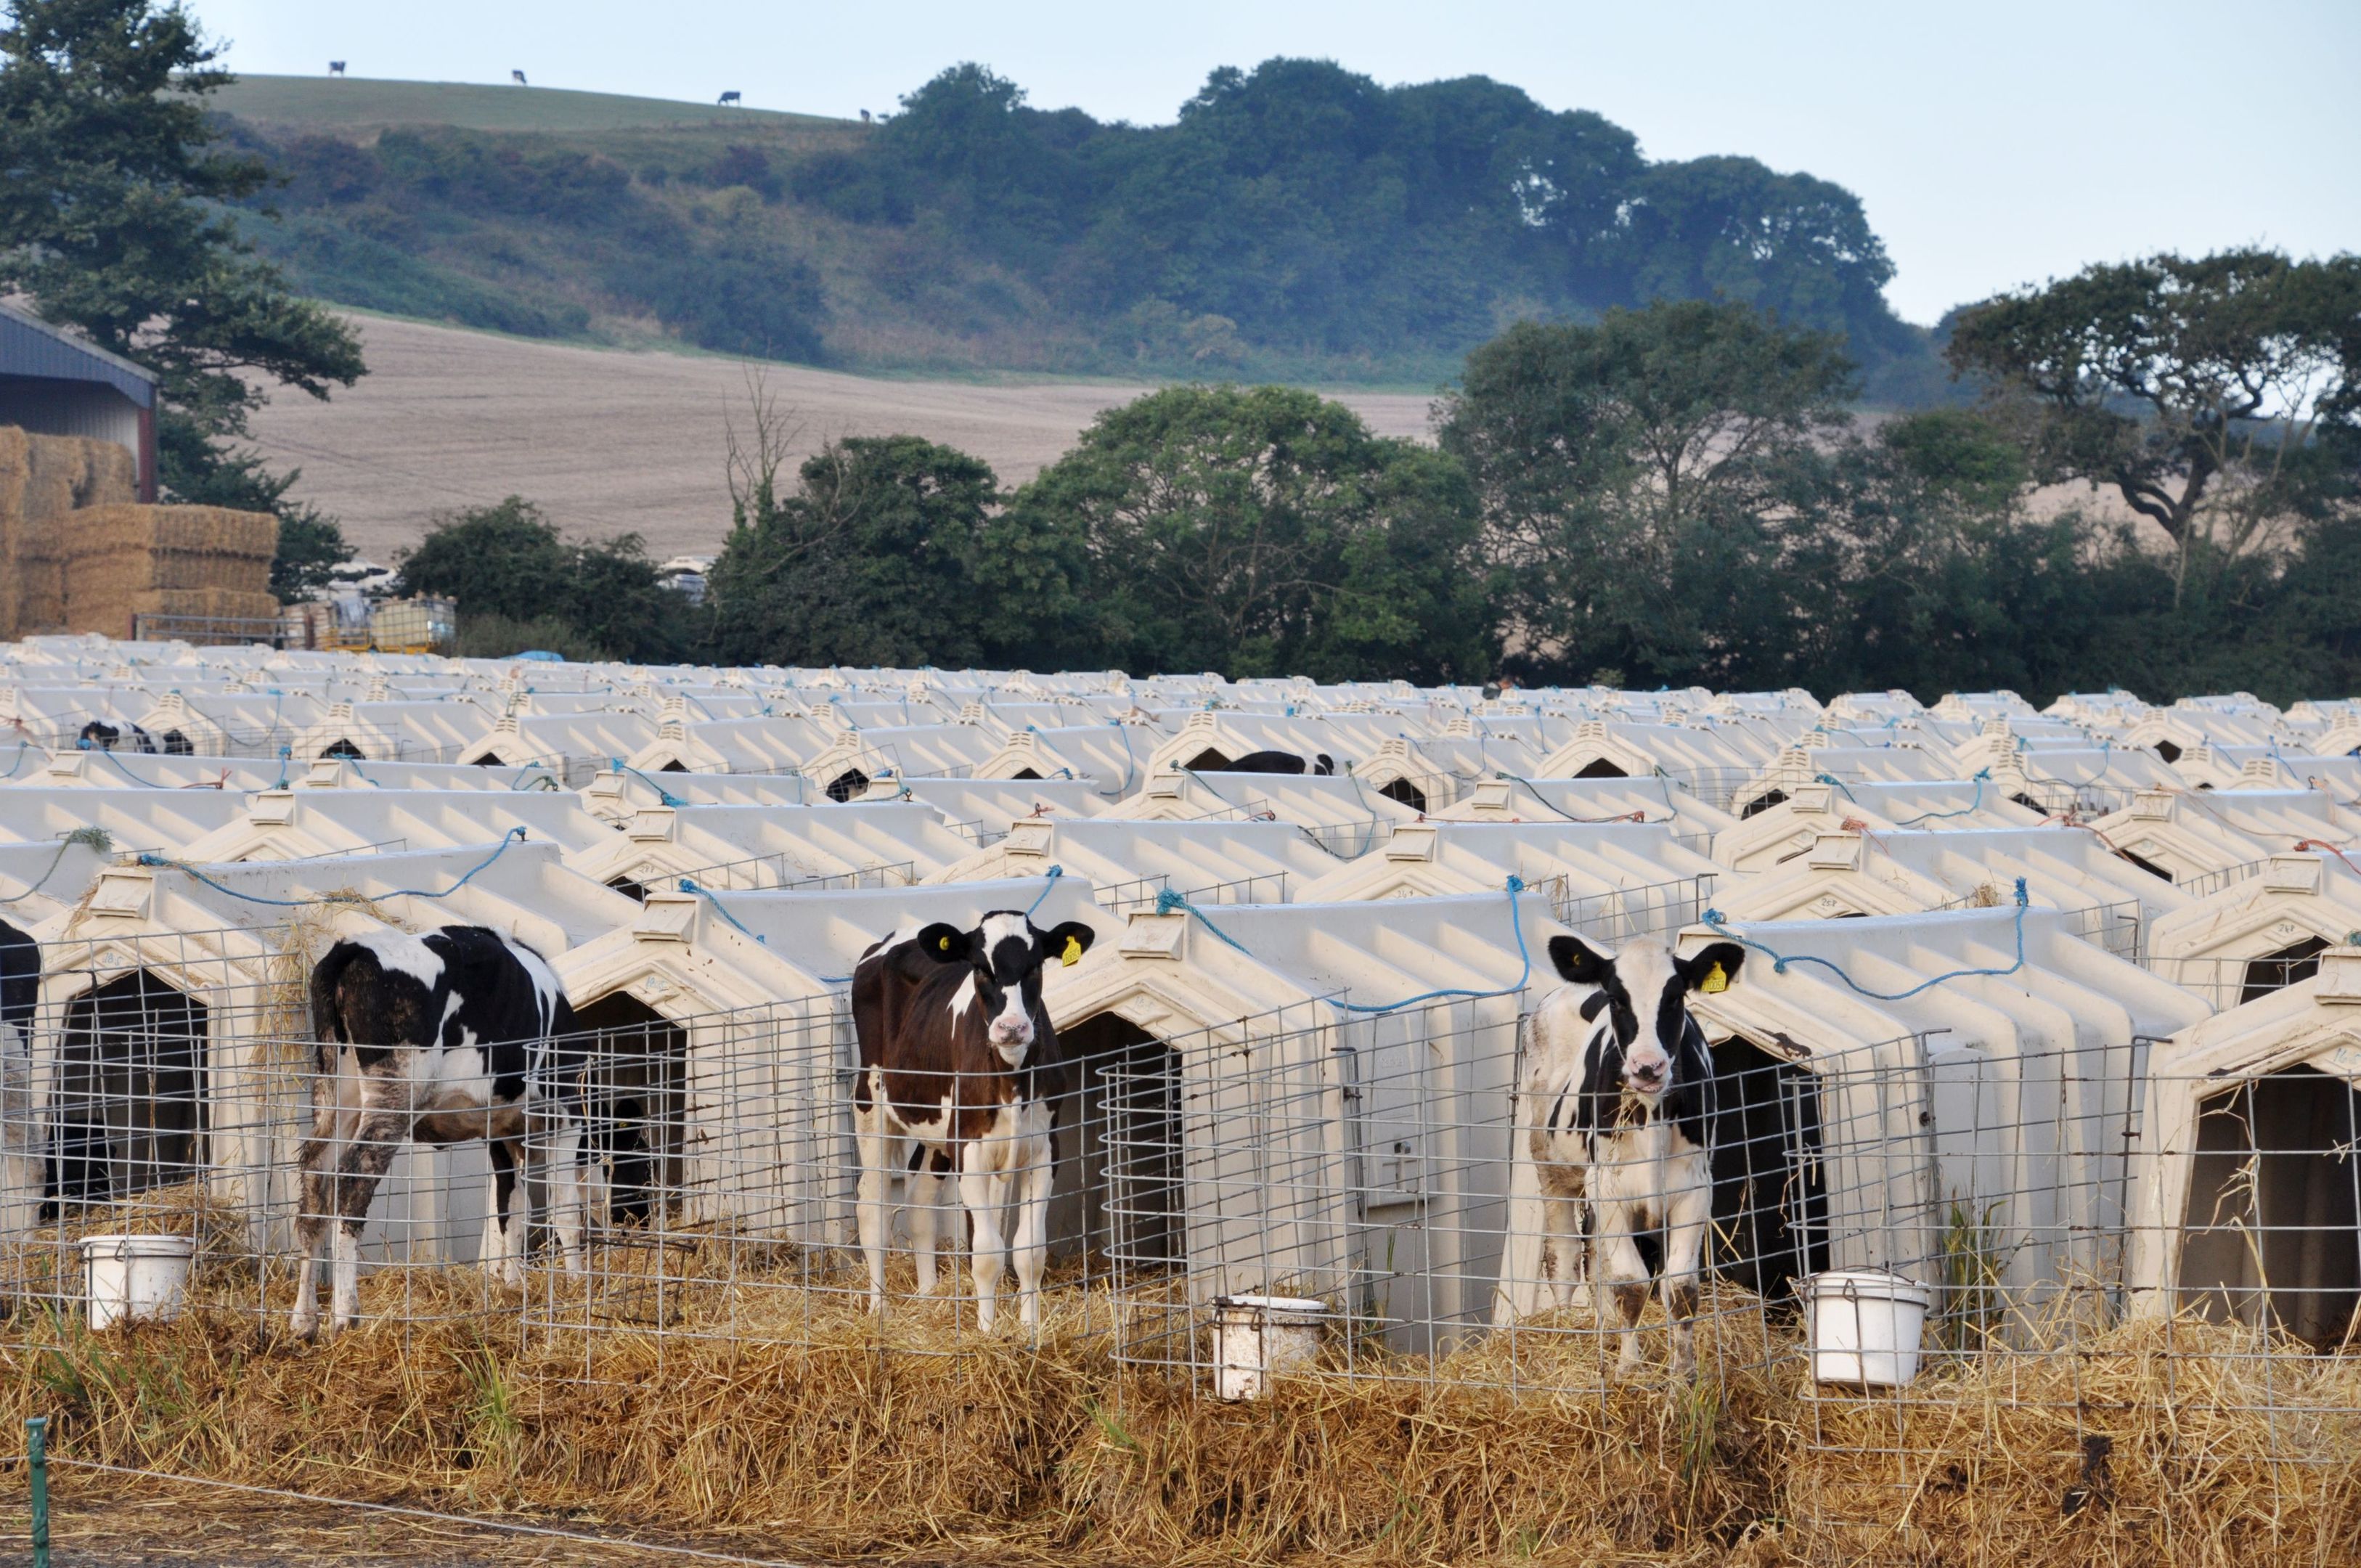 Calves penned in solitary hutches at Grange Dairy in East Chaldon, Dorset. (Animal Equality/PA Wire)